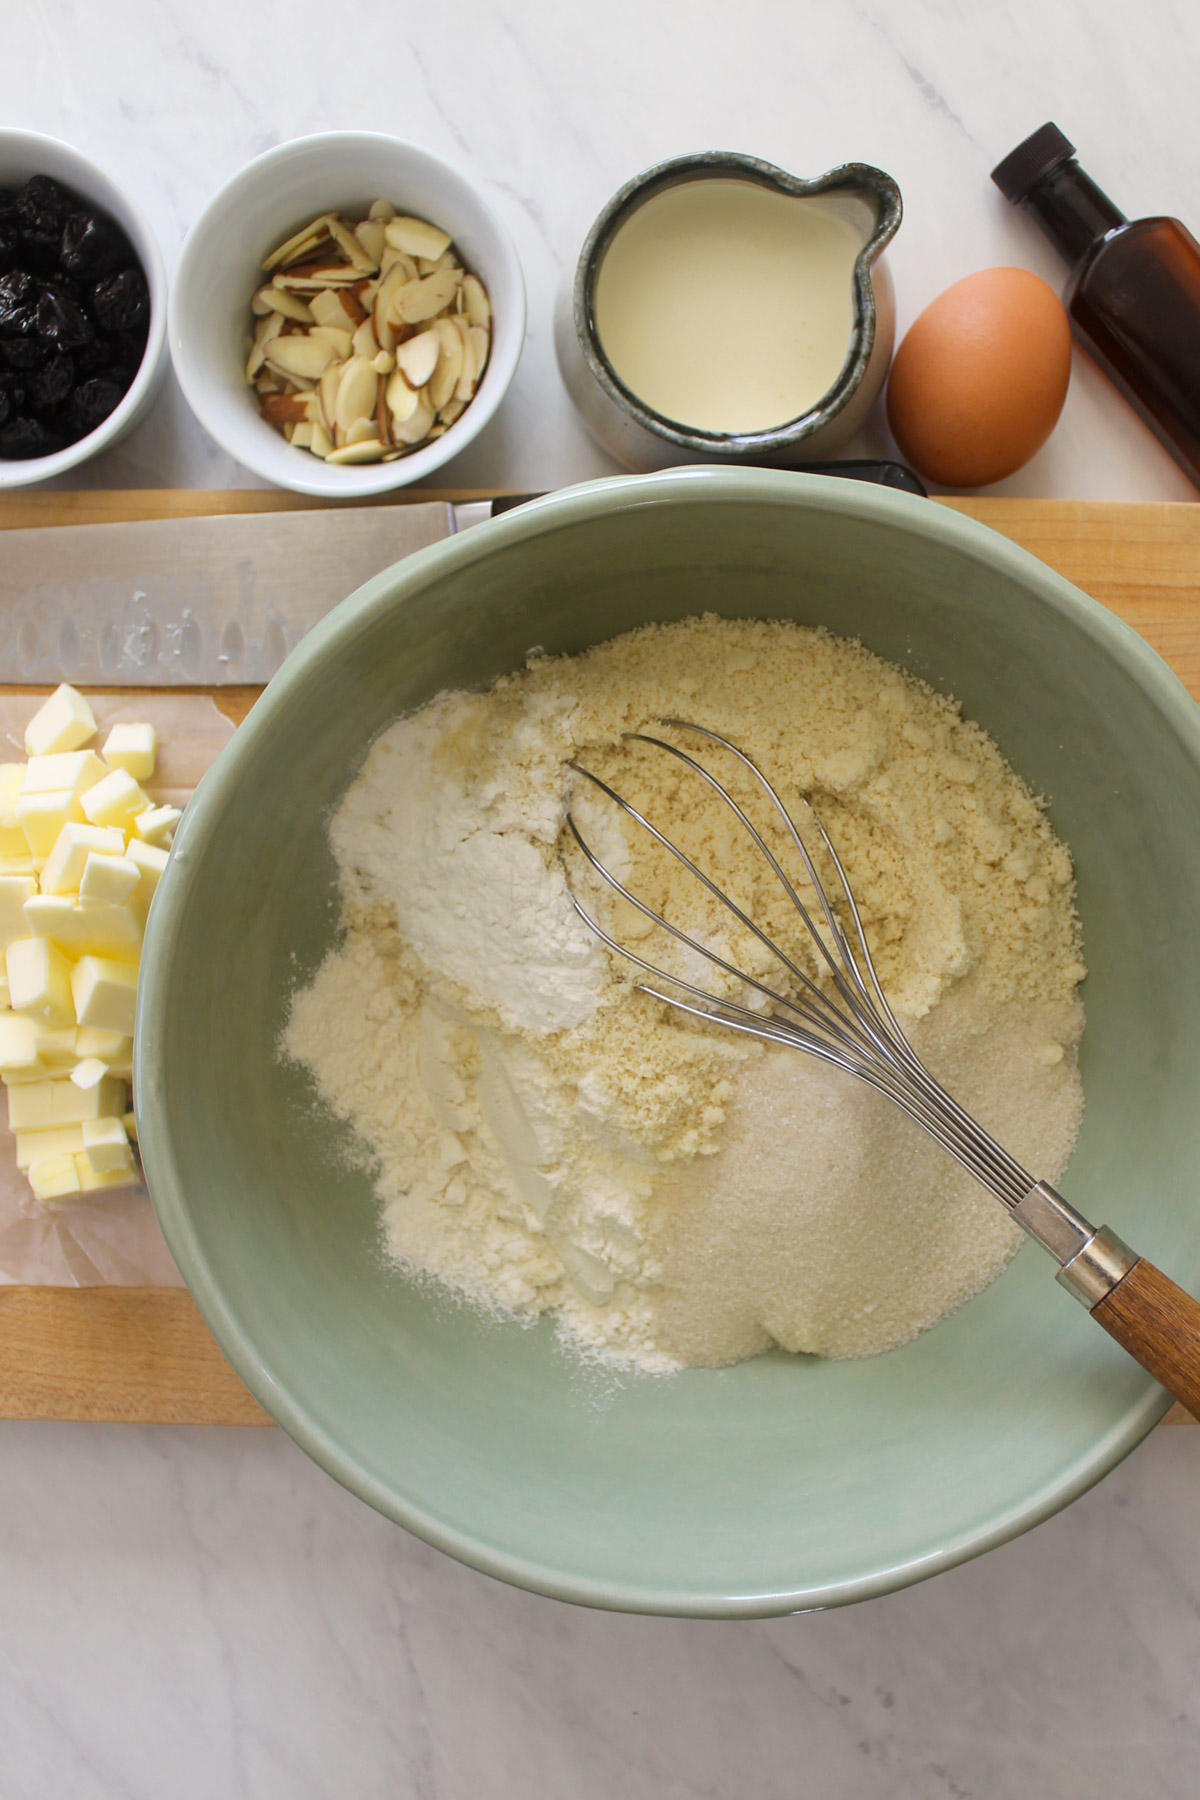 Dry ingredients for scones being whisked in a green bowl.